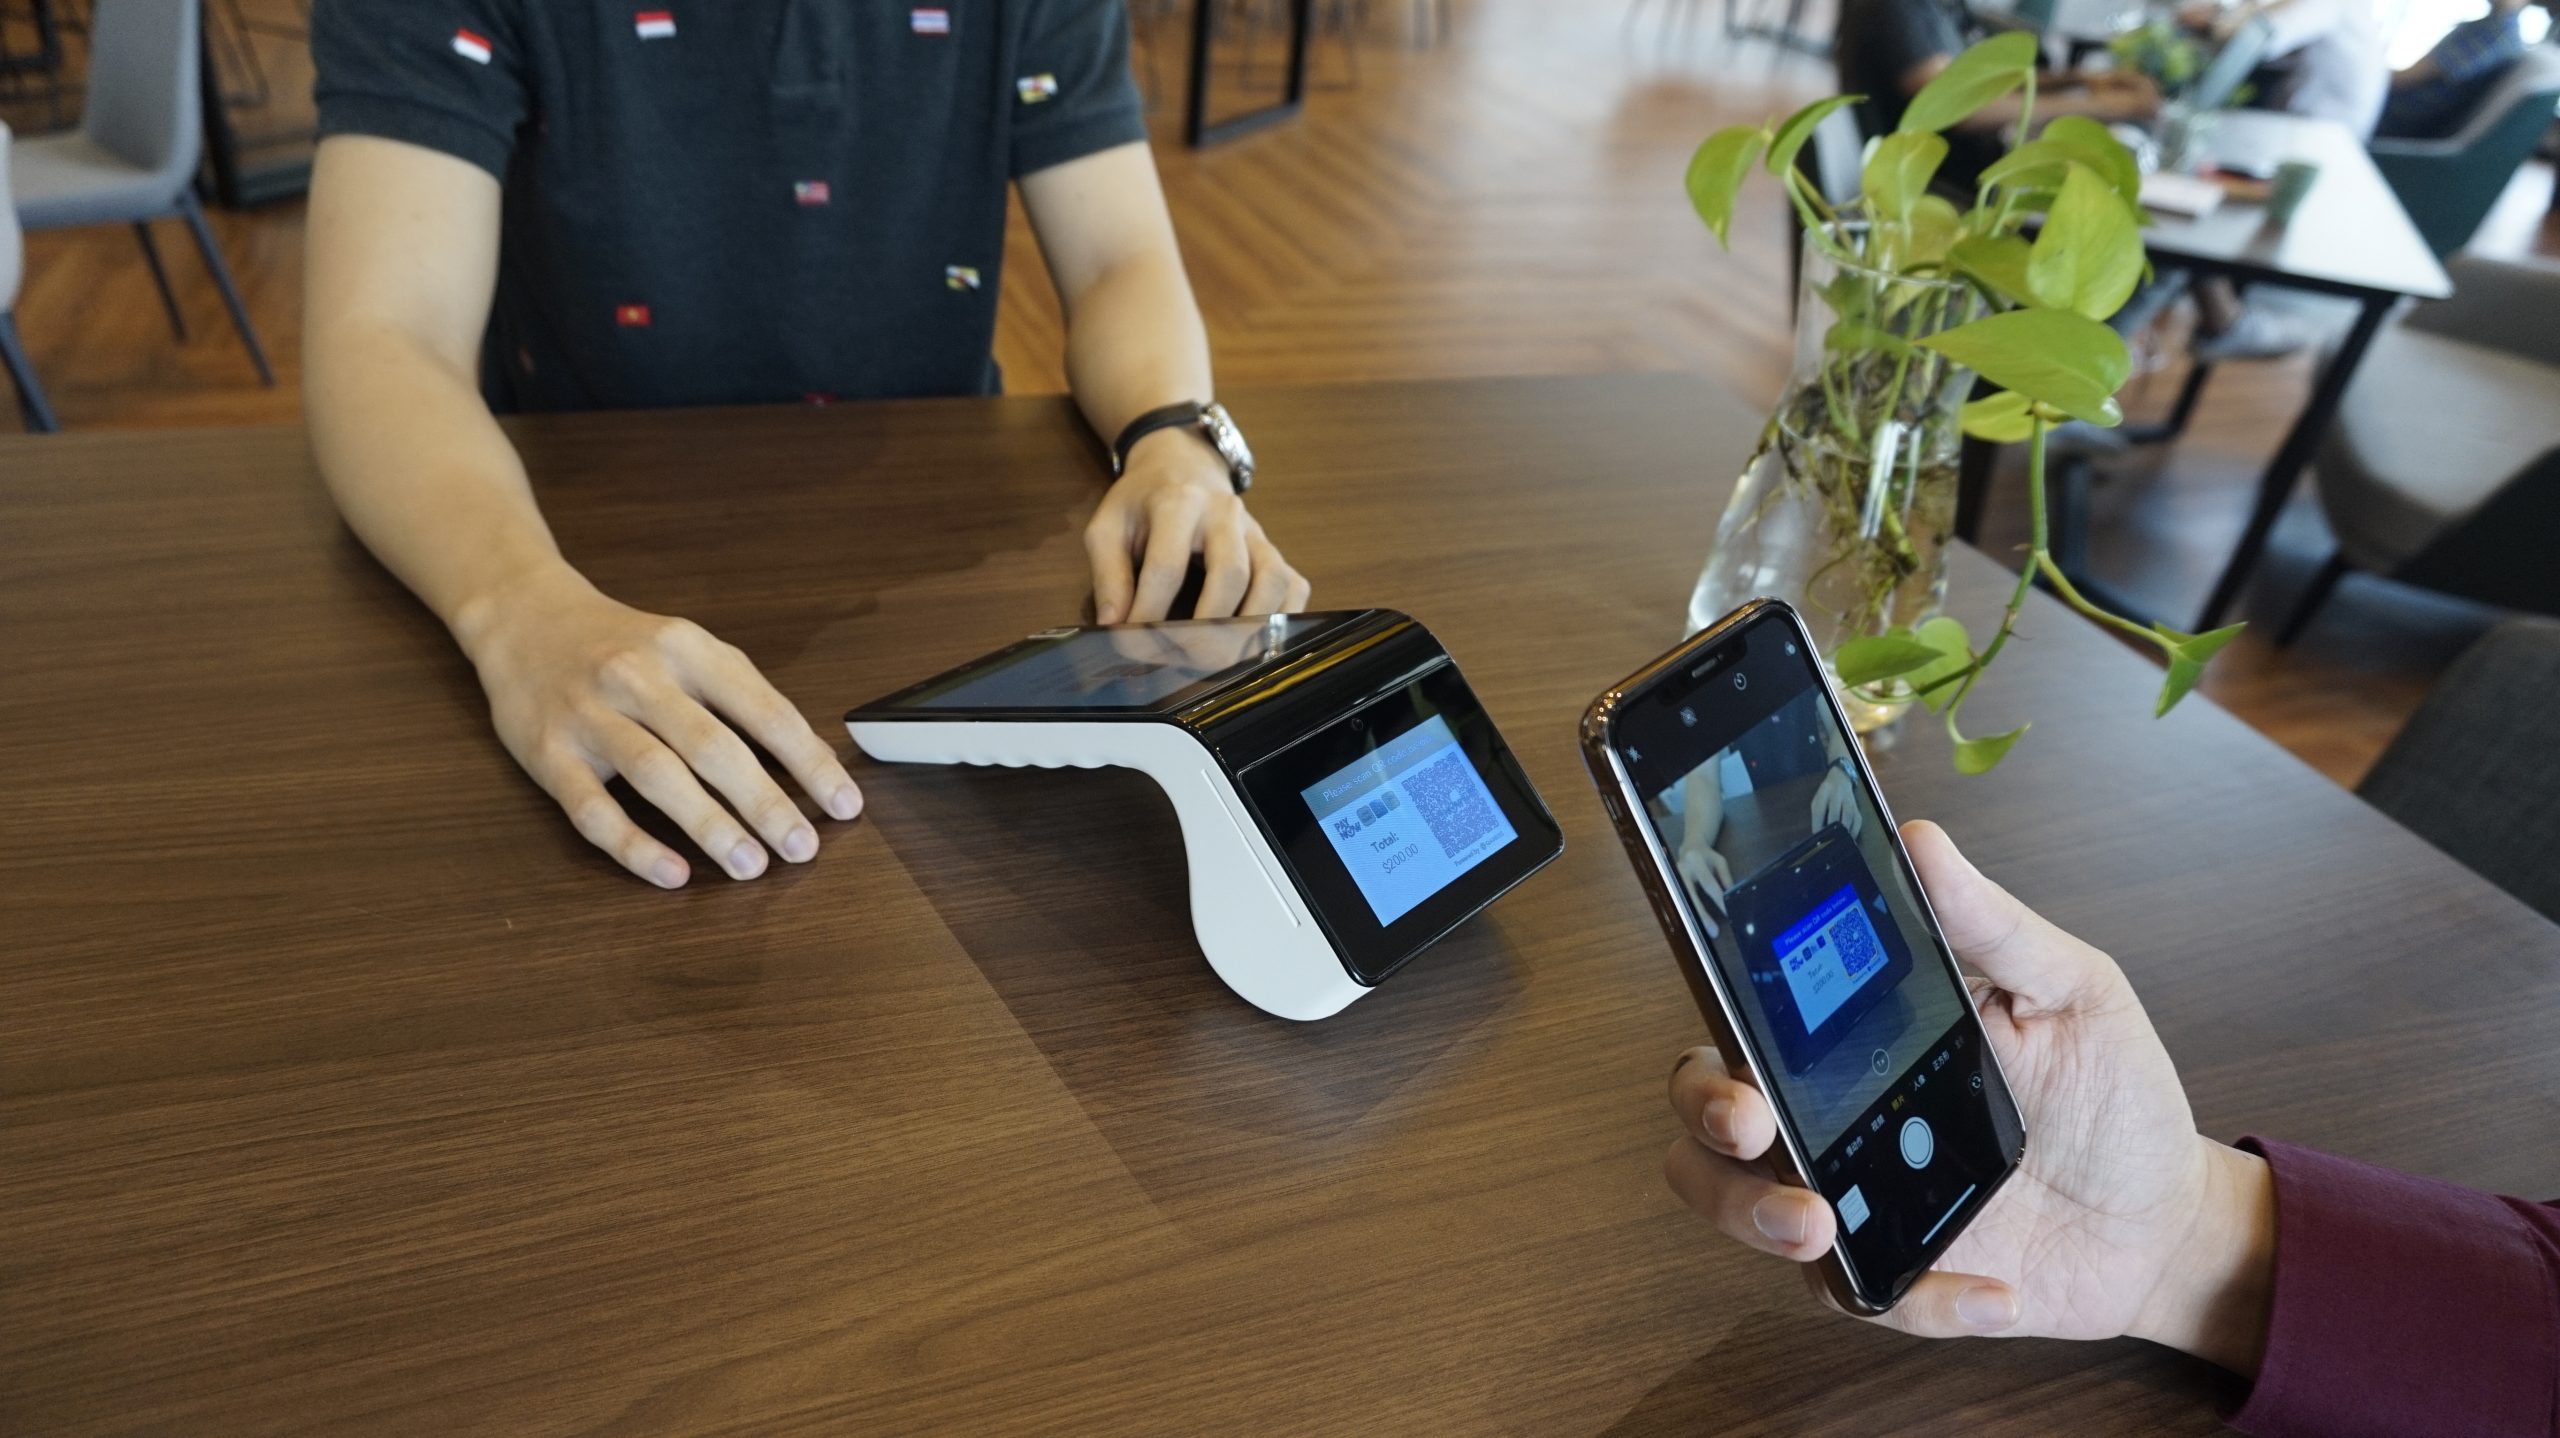 Singaporean point-of-sale provider Qashier bags SGD 1.2 million, led by Cocoon Capital